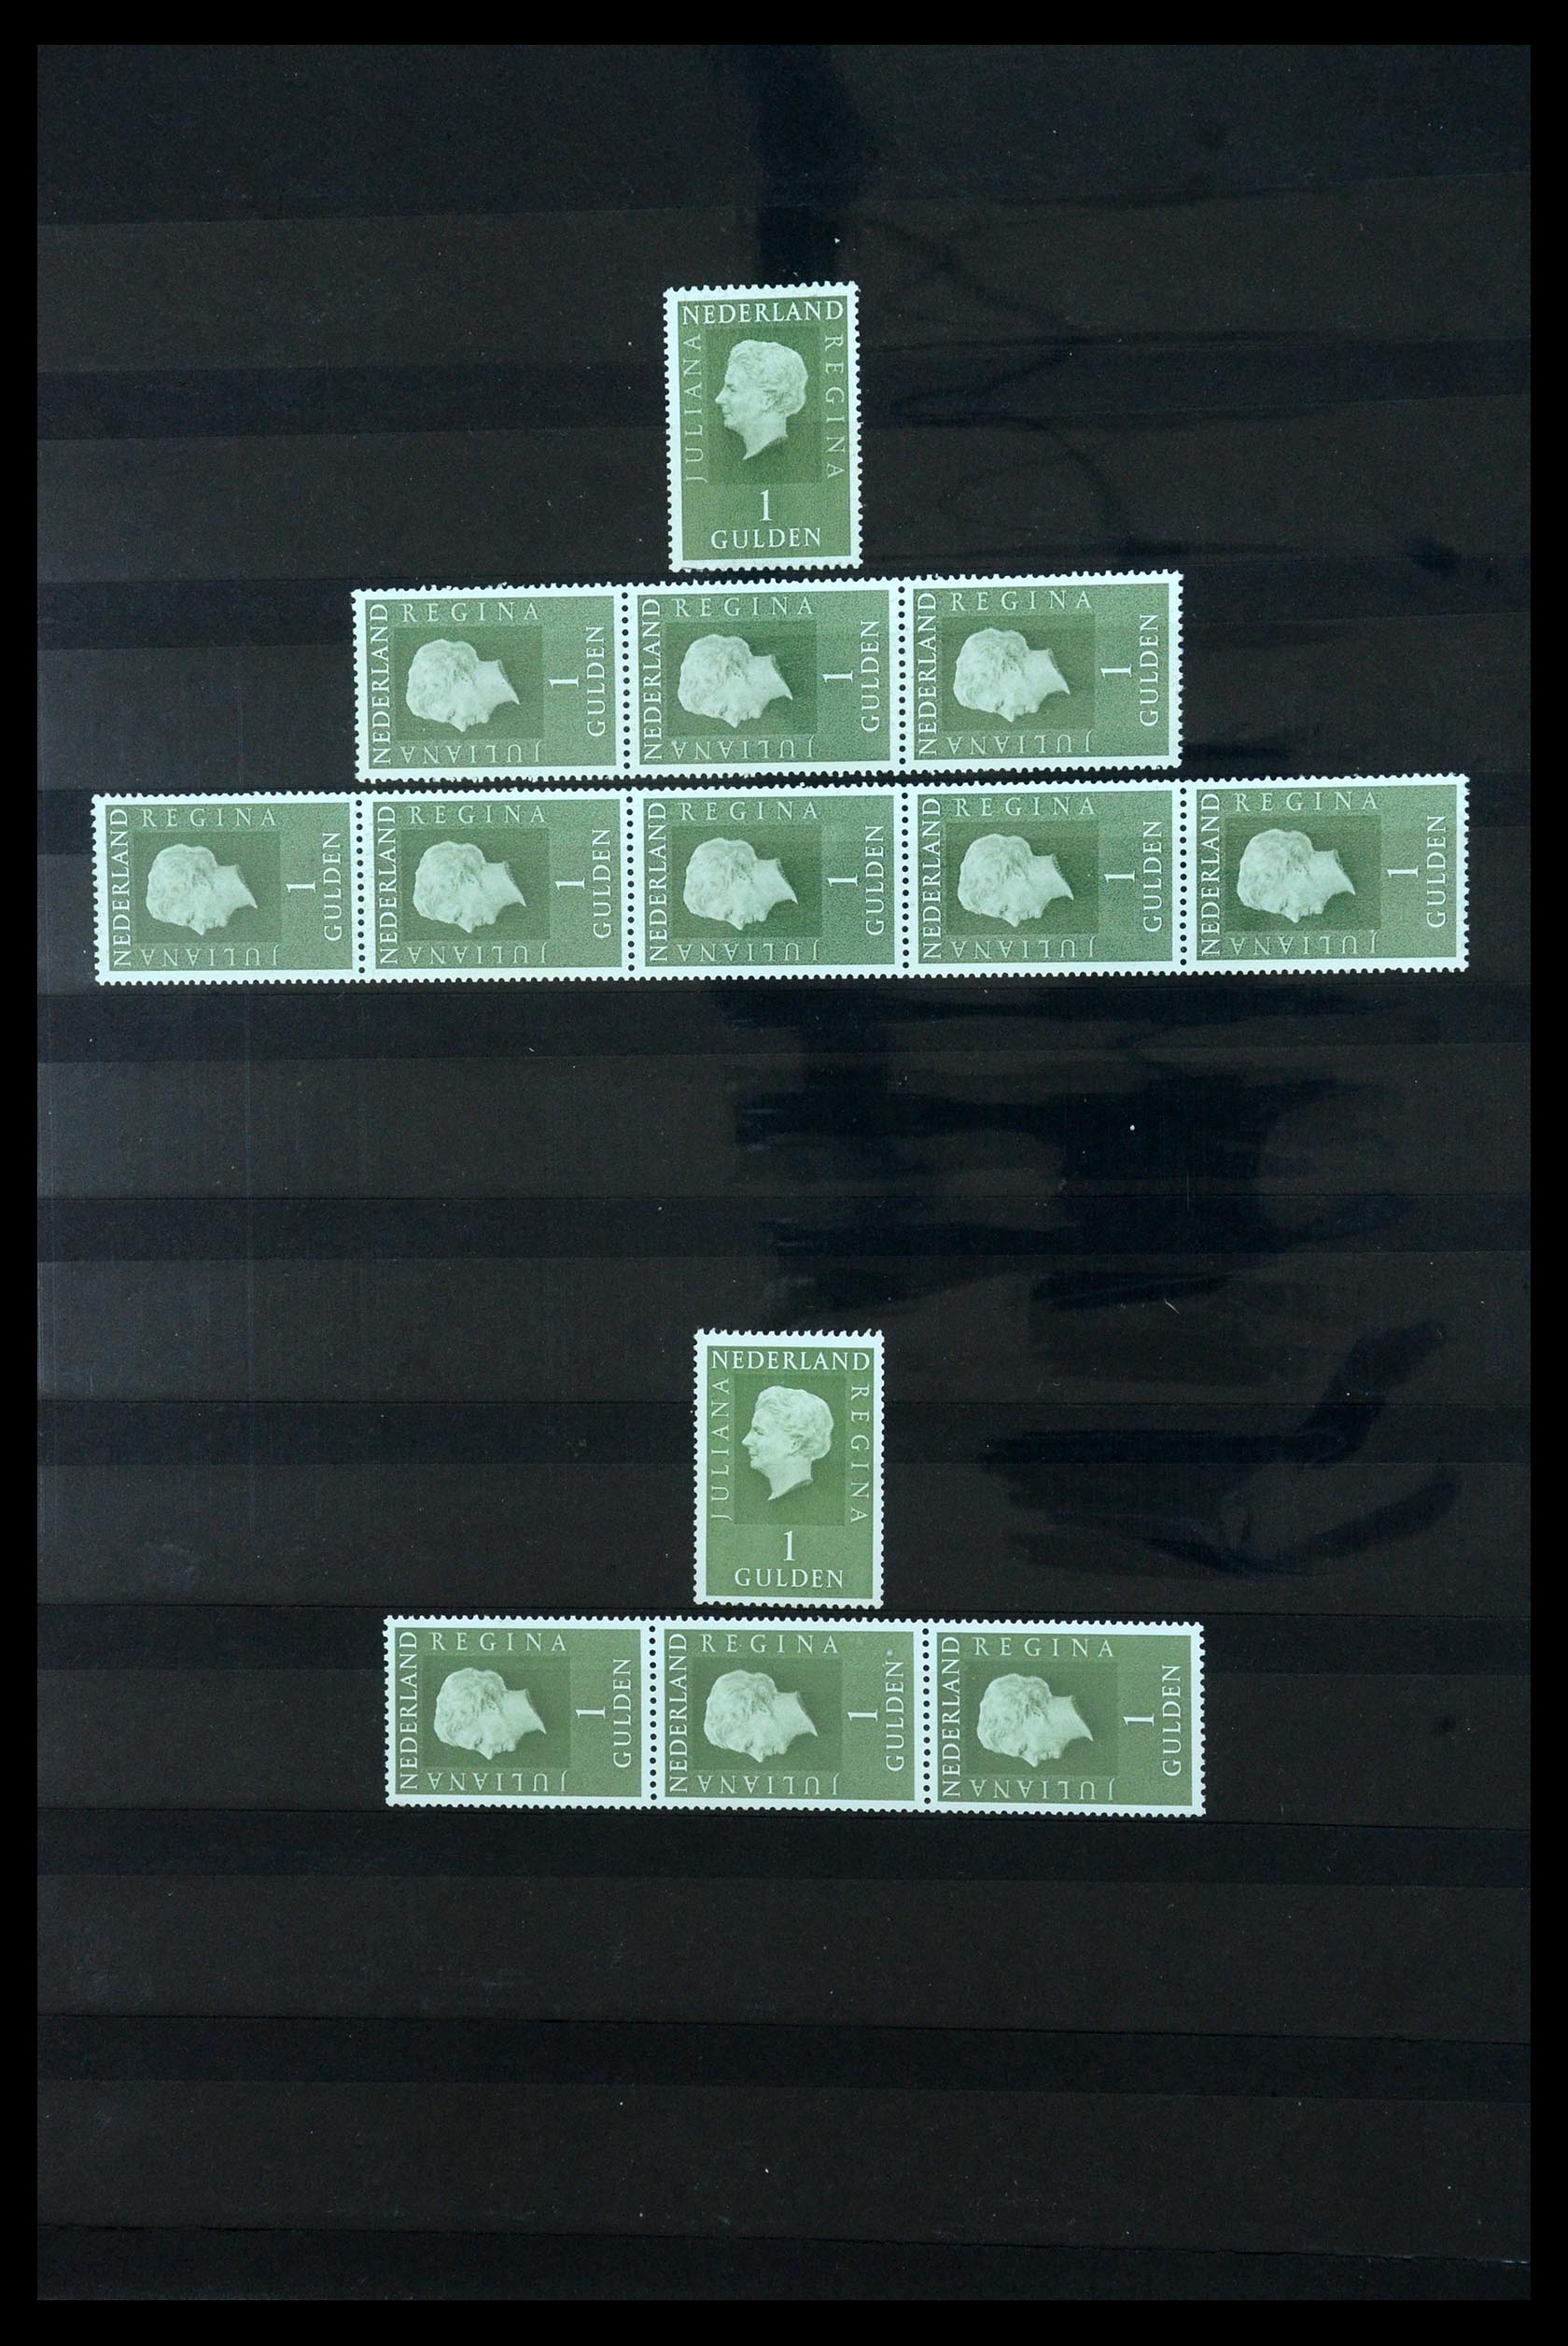 35543 059 - Stamp Collection 35543 Netherlands coilstamps 1965-1972.